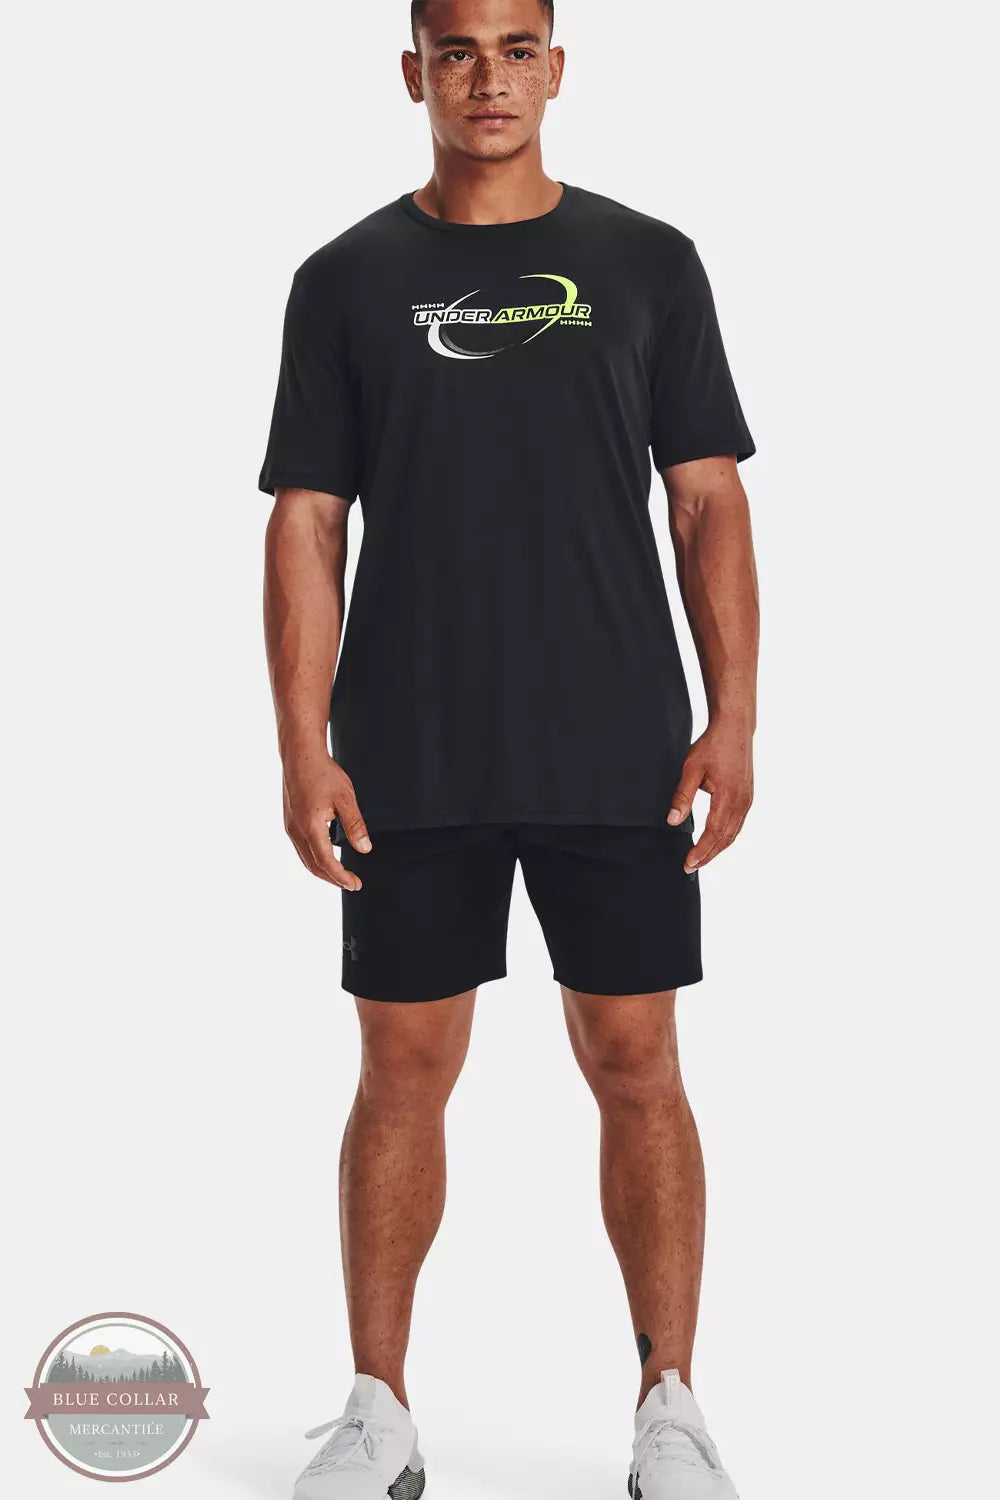 Under Armour 1376860-001 Sportstyle Short Sleeve T-Shirt in Black/Lime Surge